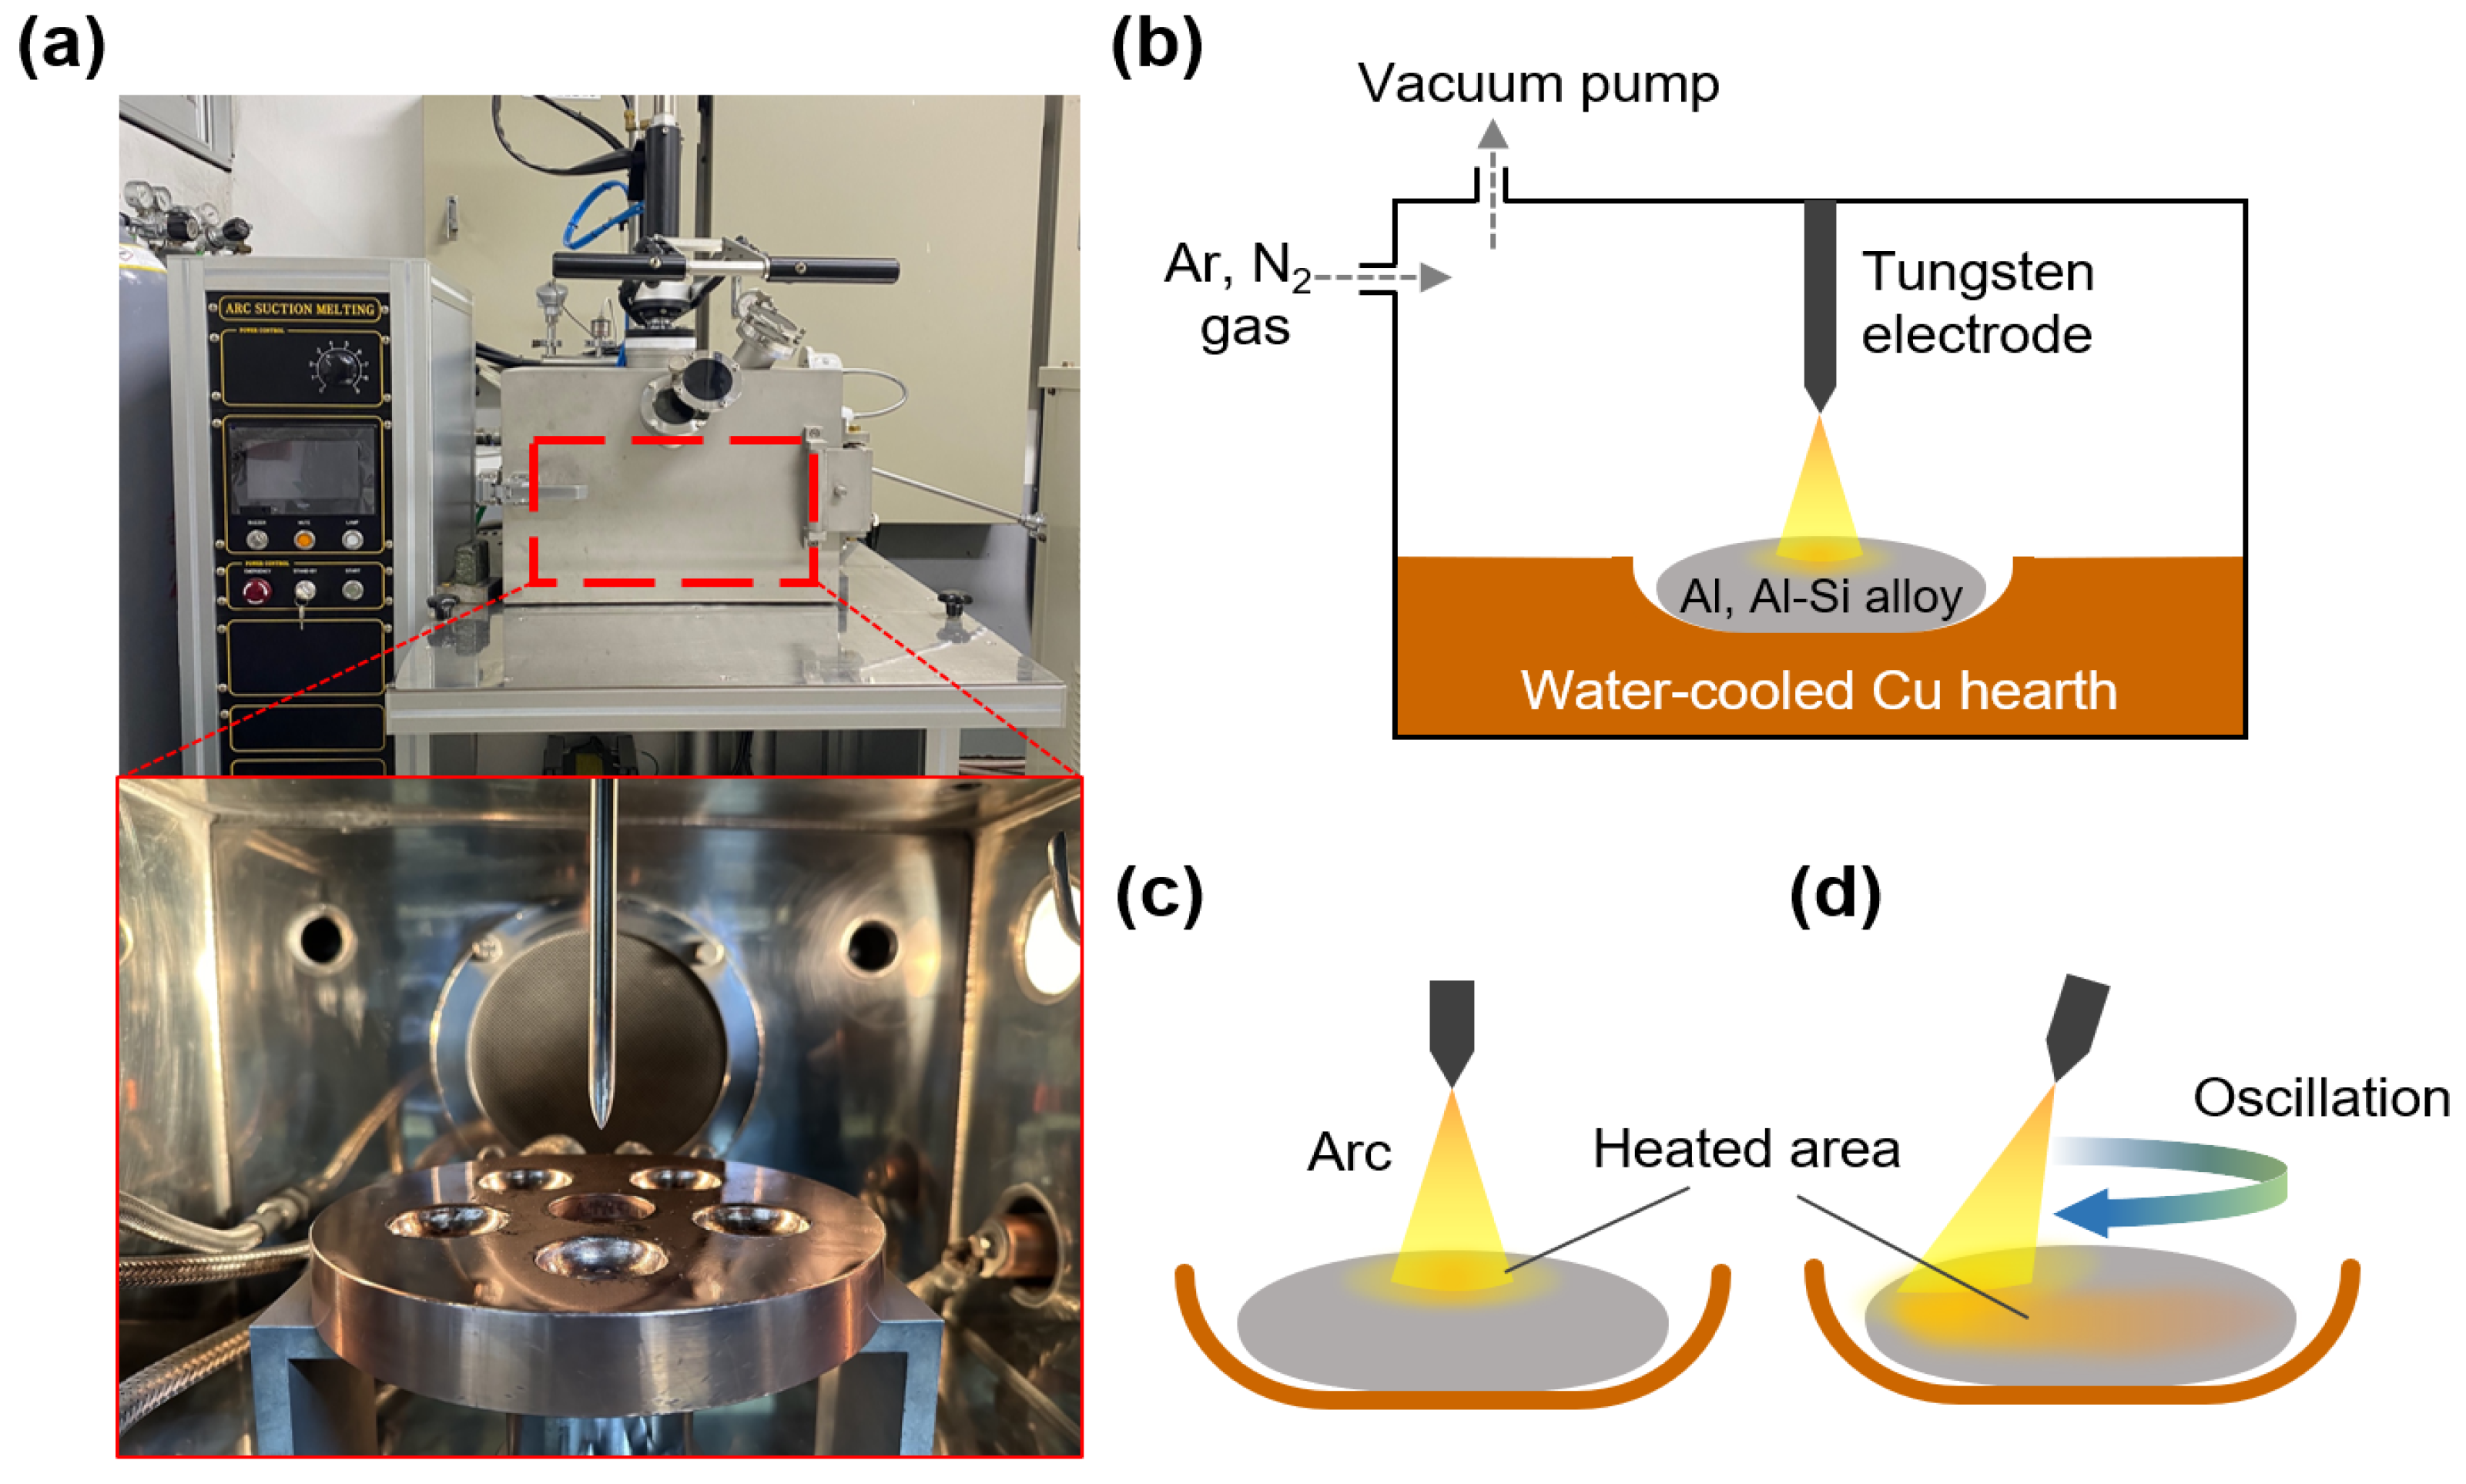 Heat transfer coefficient between water and aluminum nitride obtained